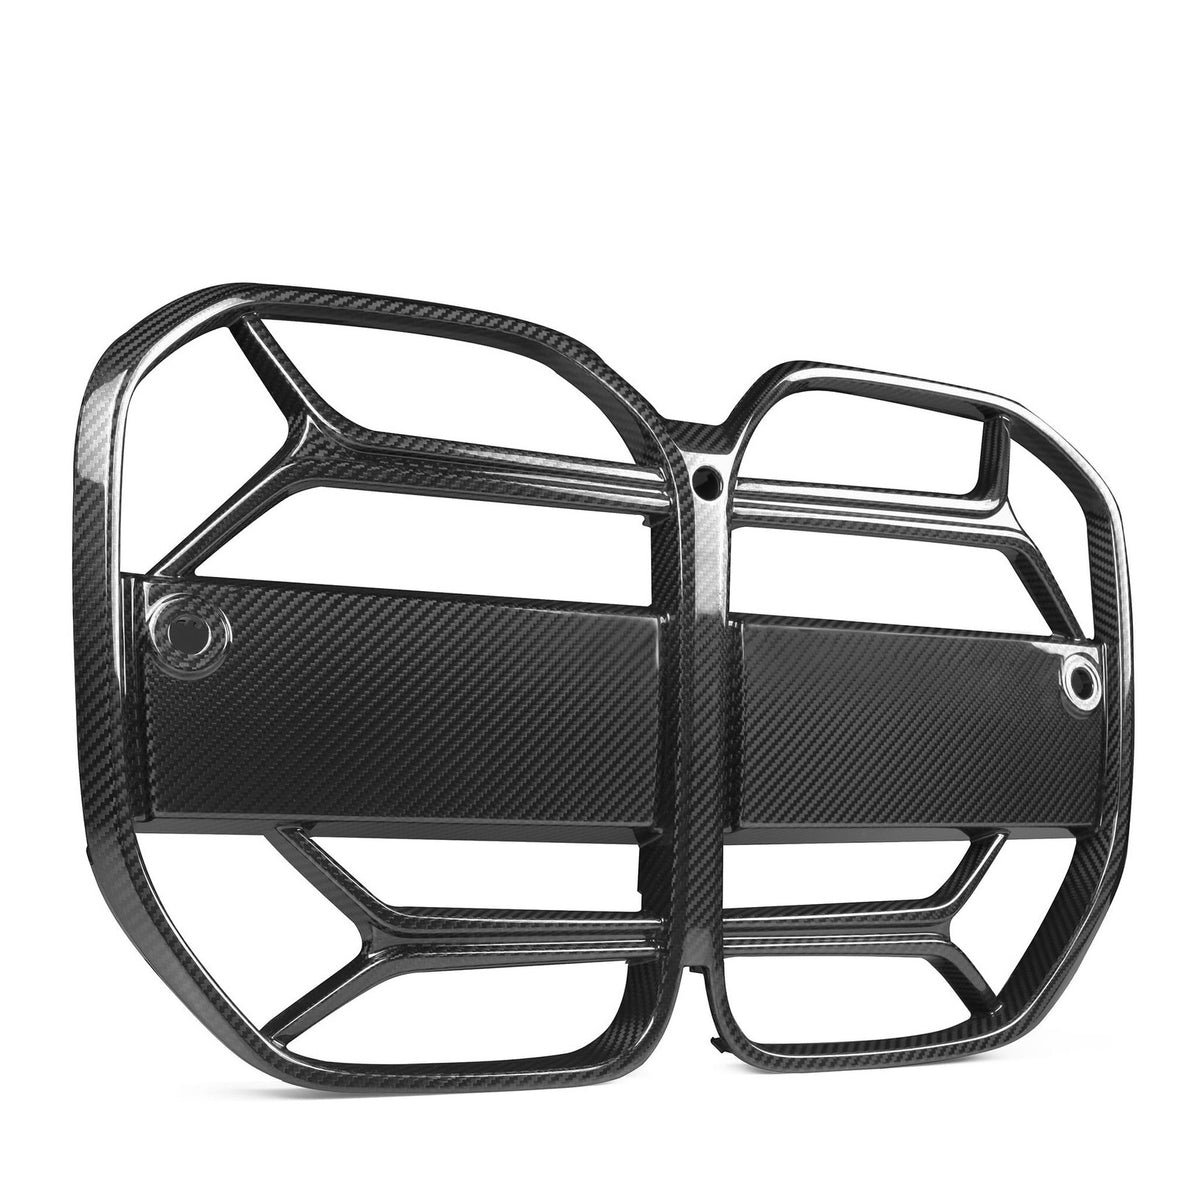 Carbon Fiber Grill for BMW 4 Series G22 G23